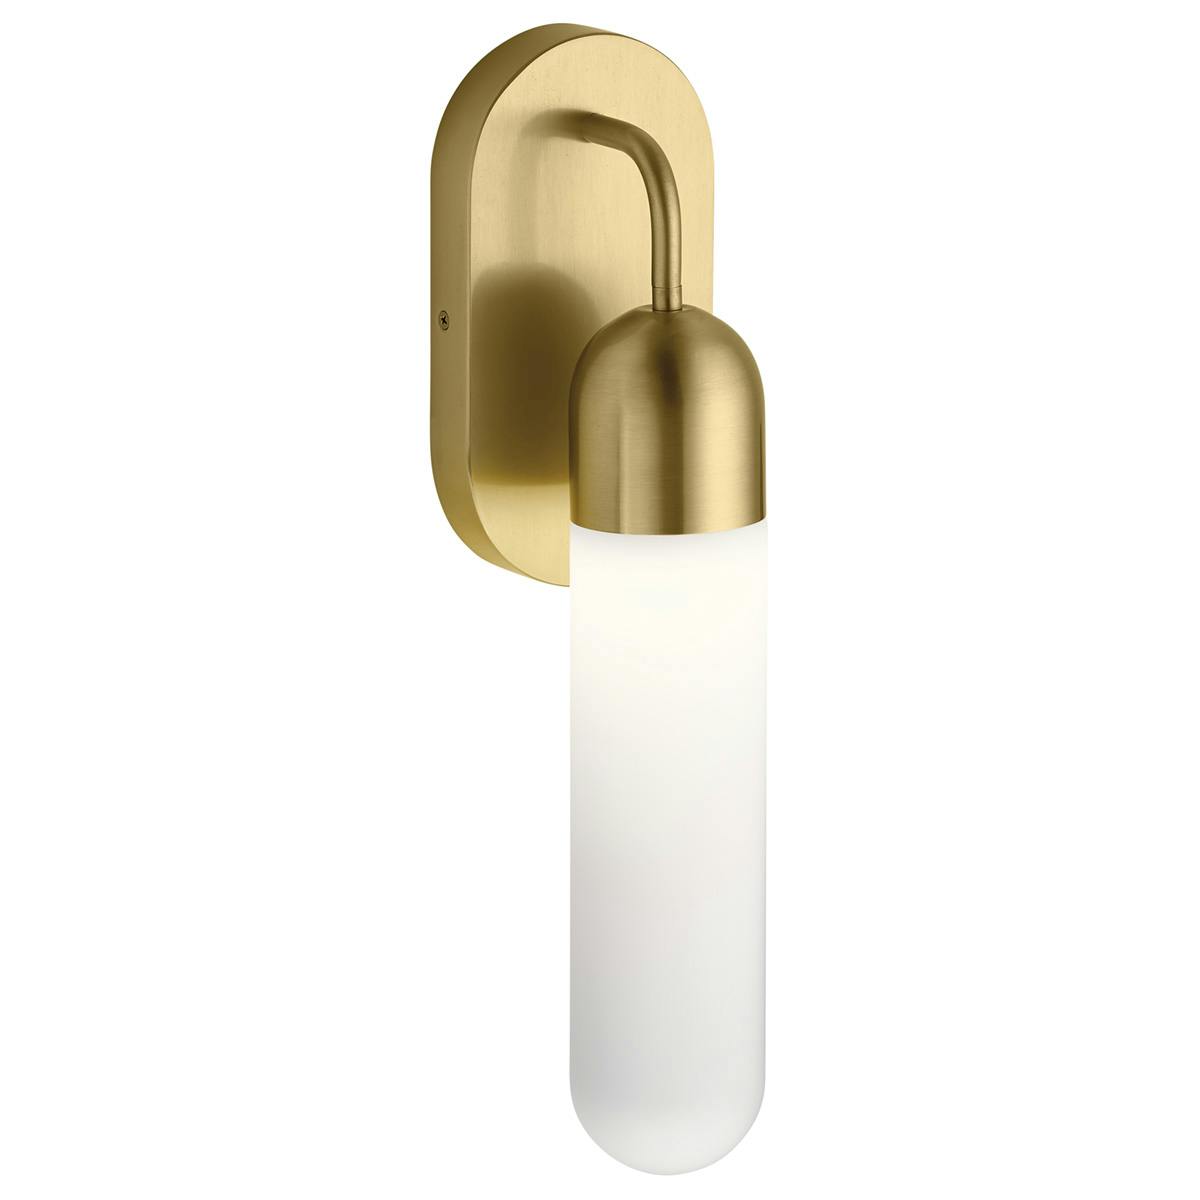 The Sorno Wall Sconce Champagne Gold facing down on a white background